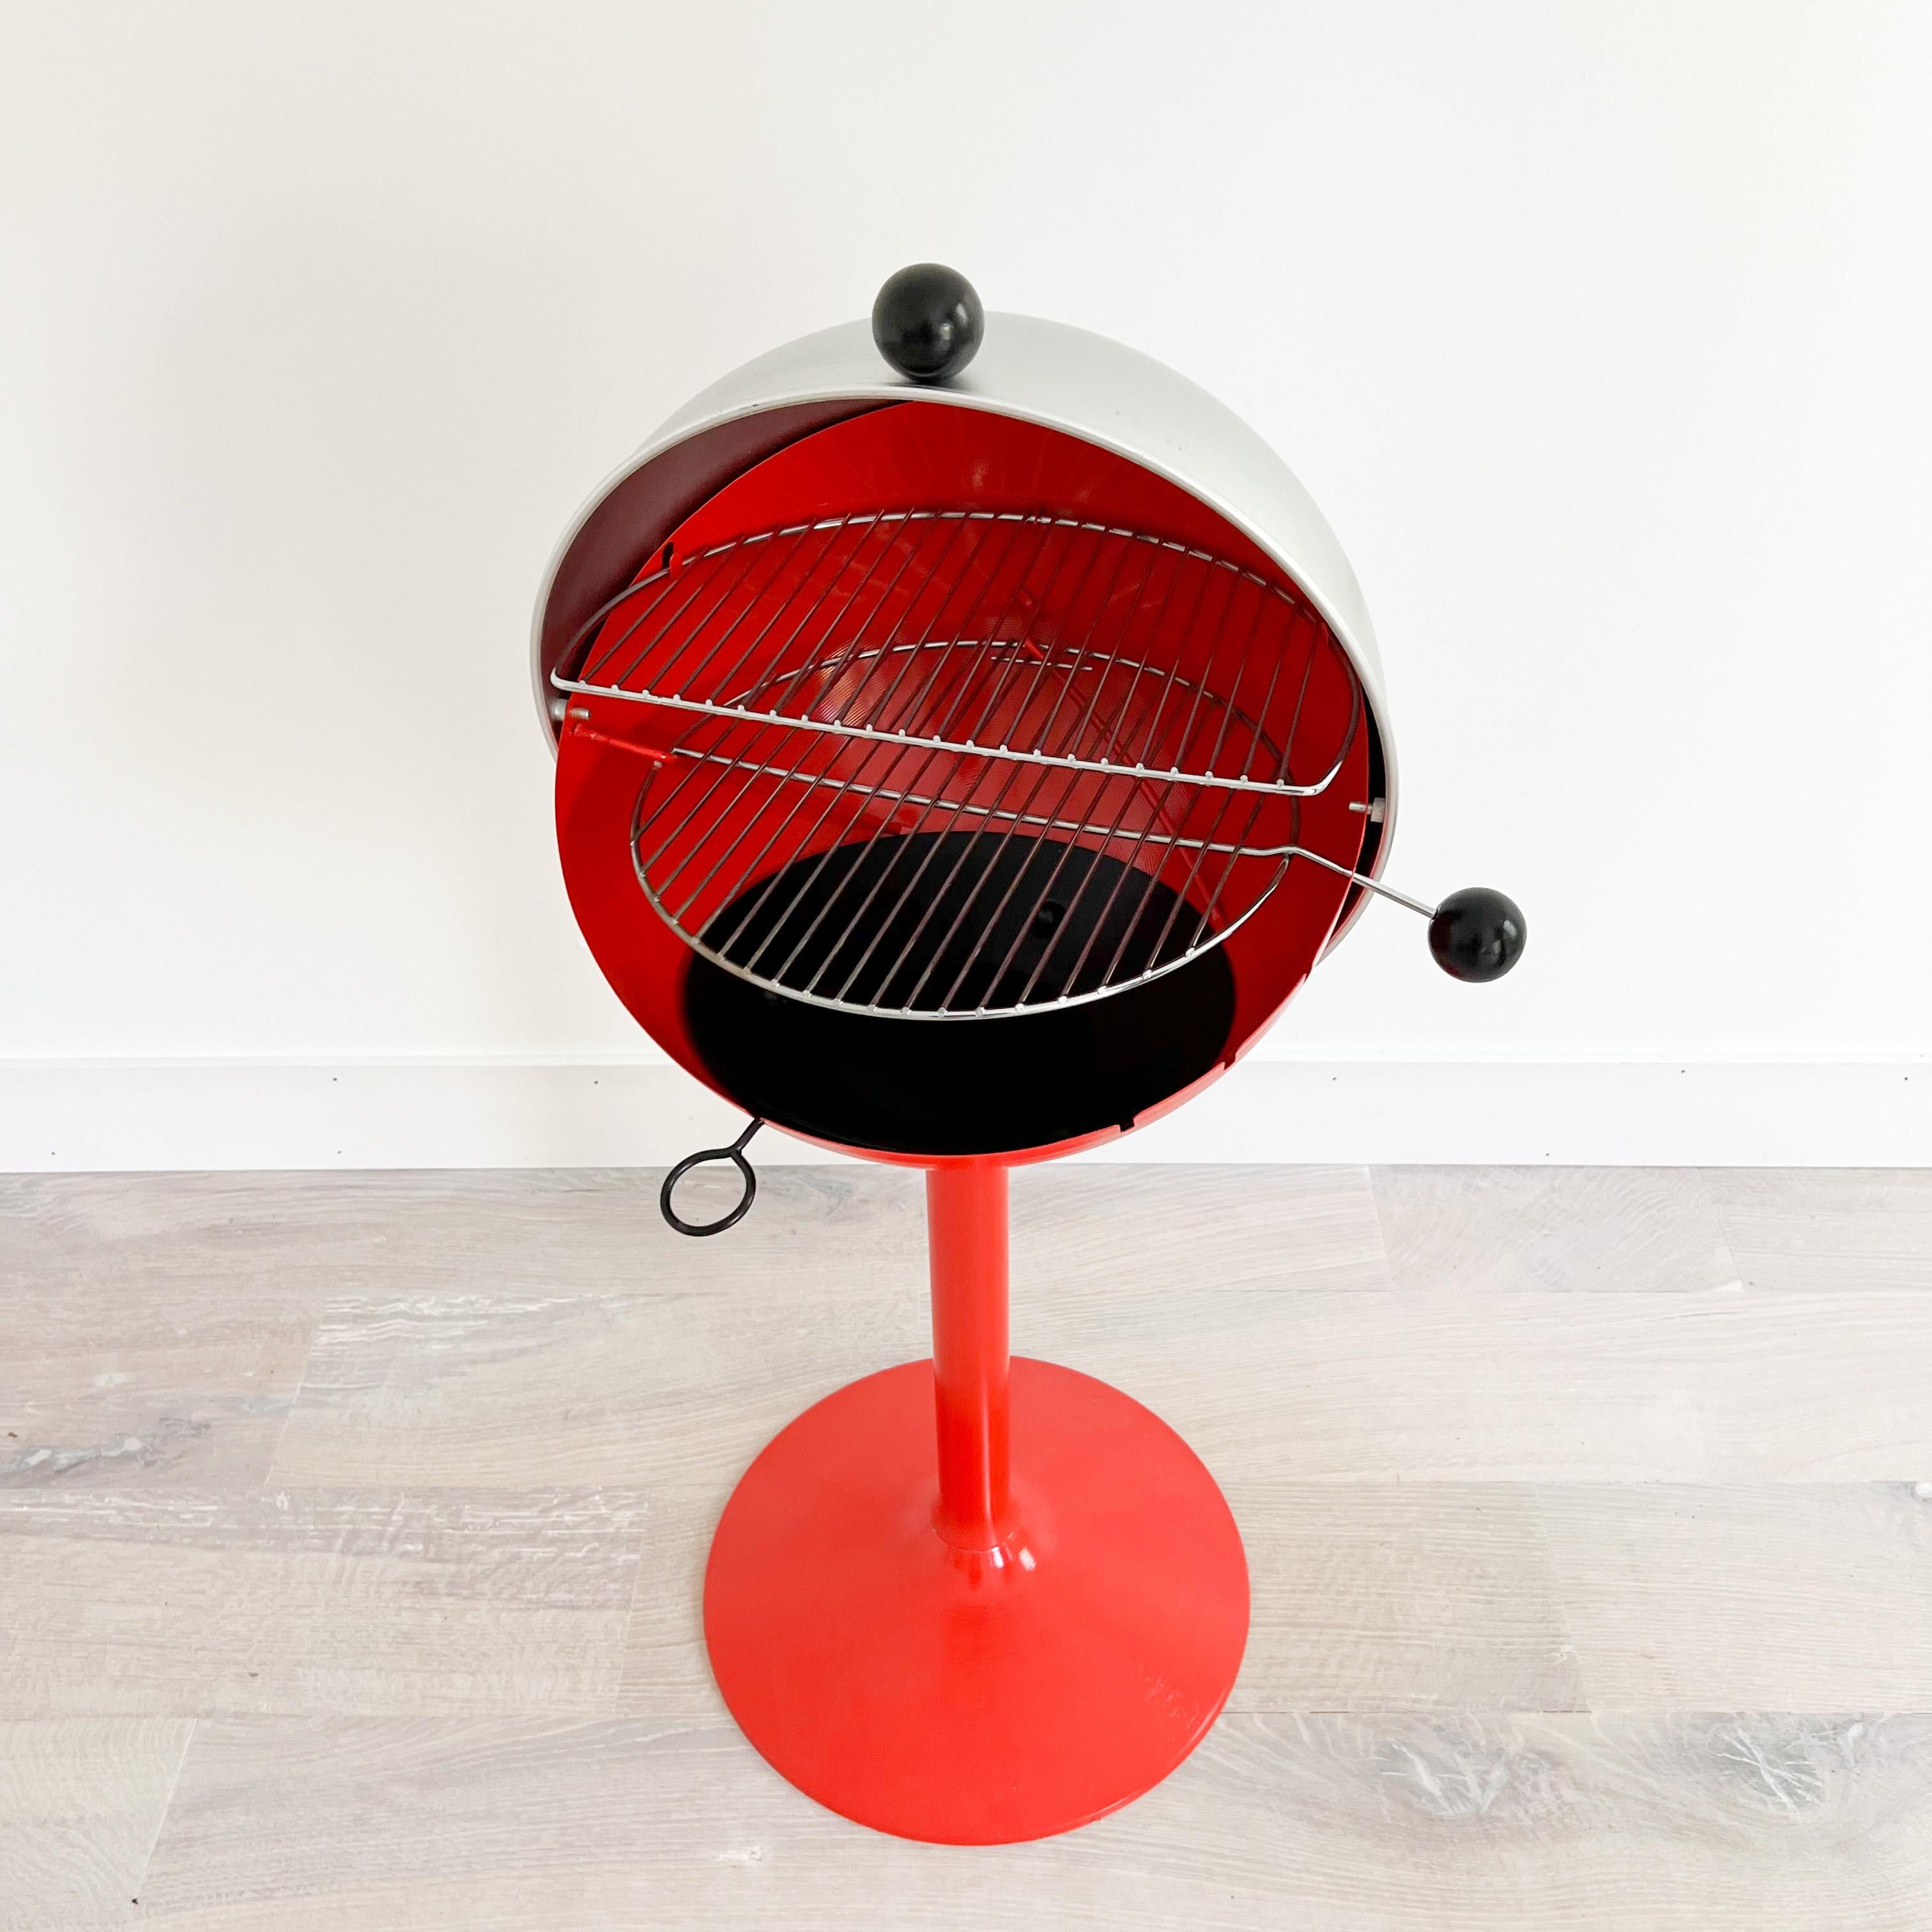 Never Been Used, New Old Stock Ball B Q Tulip Based Space Age Grill 4